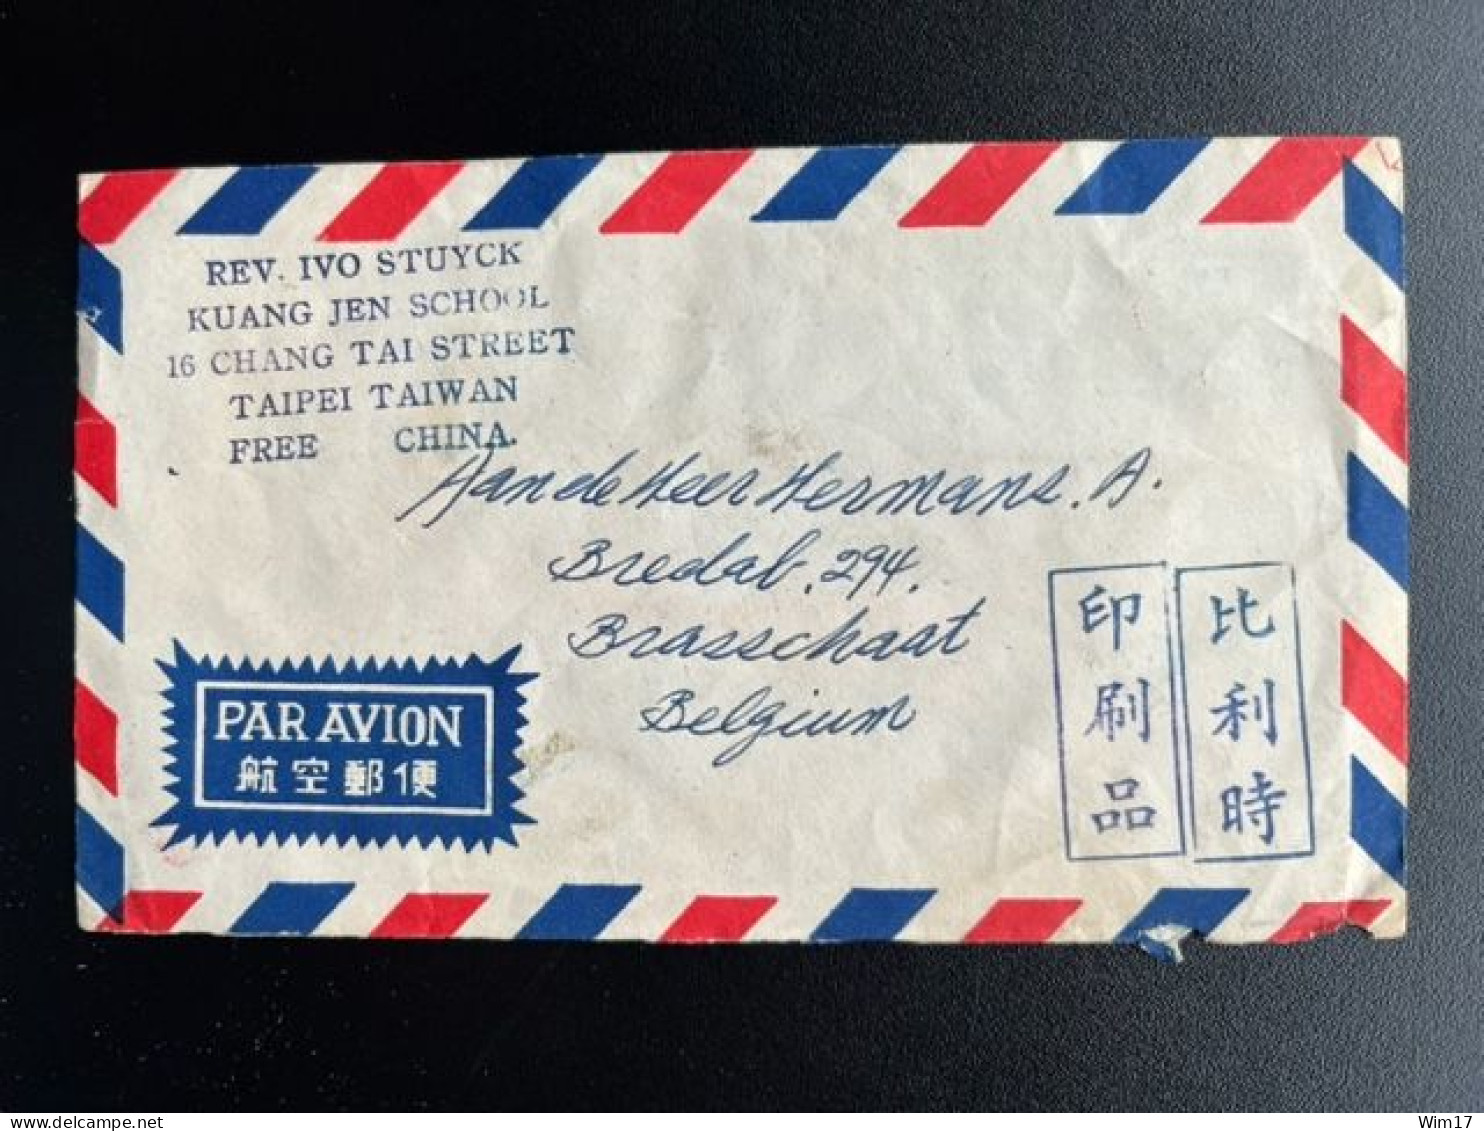 TAIWAN FORMOSA CHINA 1960 AIR MAIL LETTER TAIPEI TO BRASSCHAAT BELGIUM 26-10-1960 - Covers & Documents